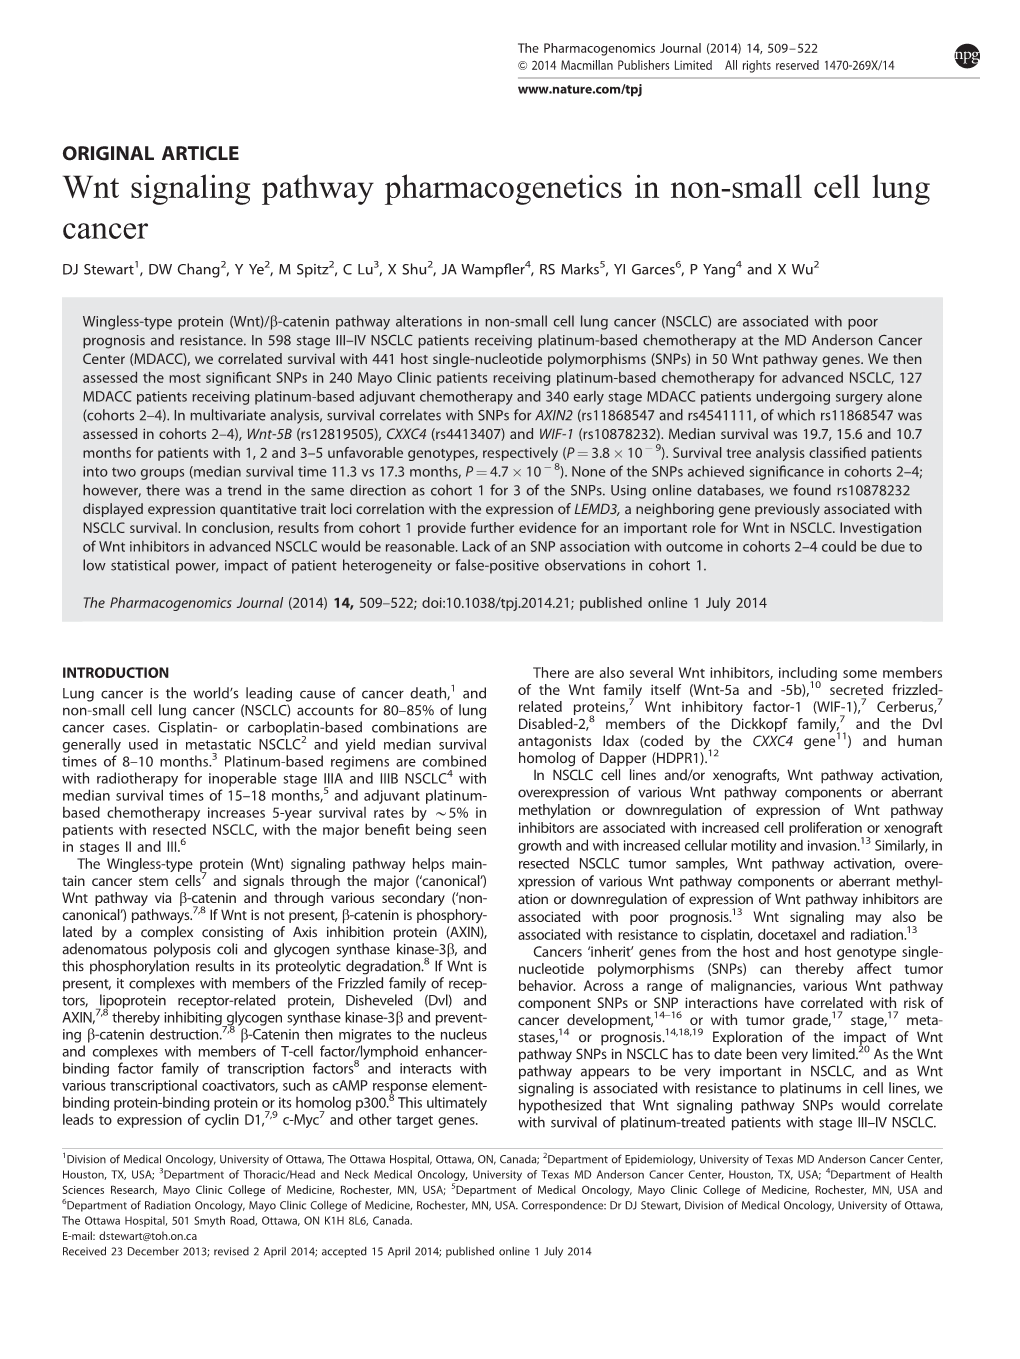 Wnt Signaling Pathway Pharmacogenetics in Non-Small Cell Lung Cancer